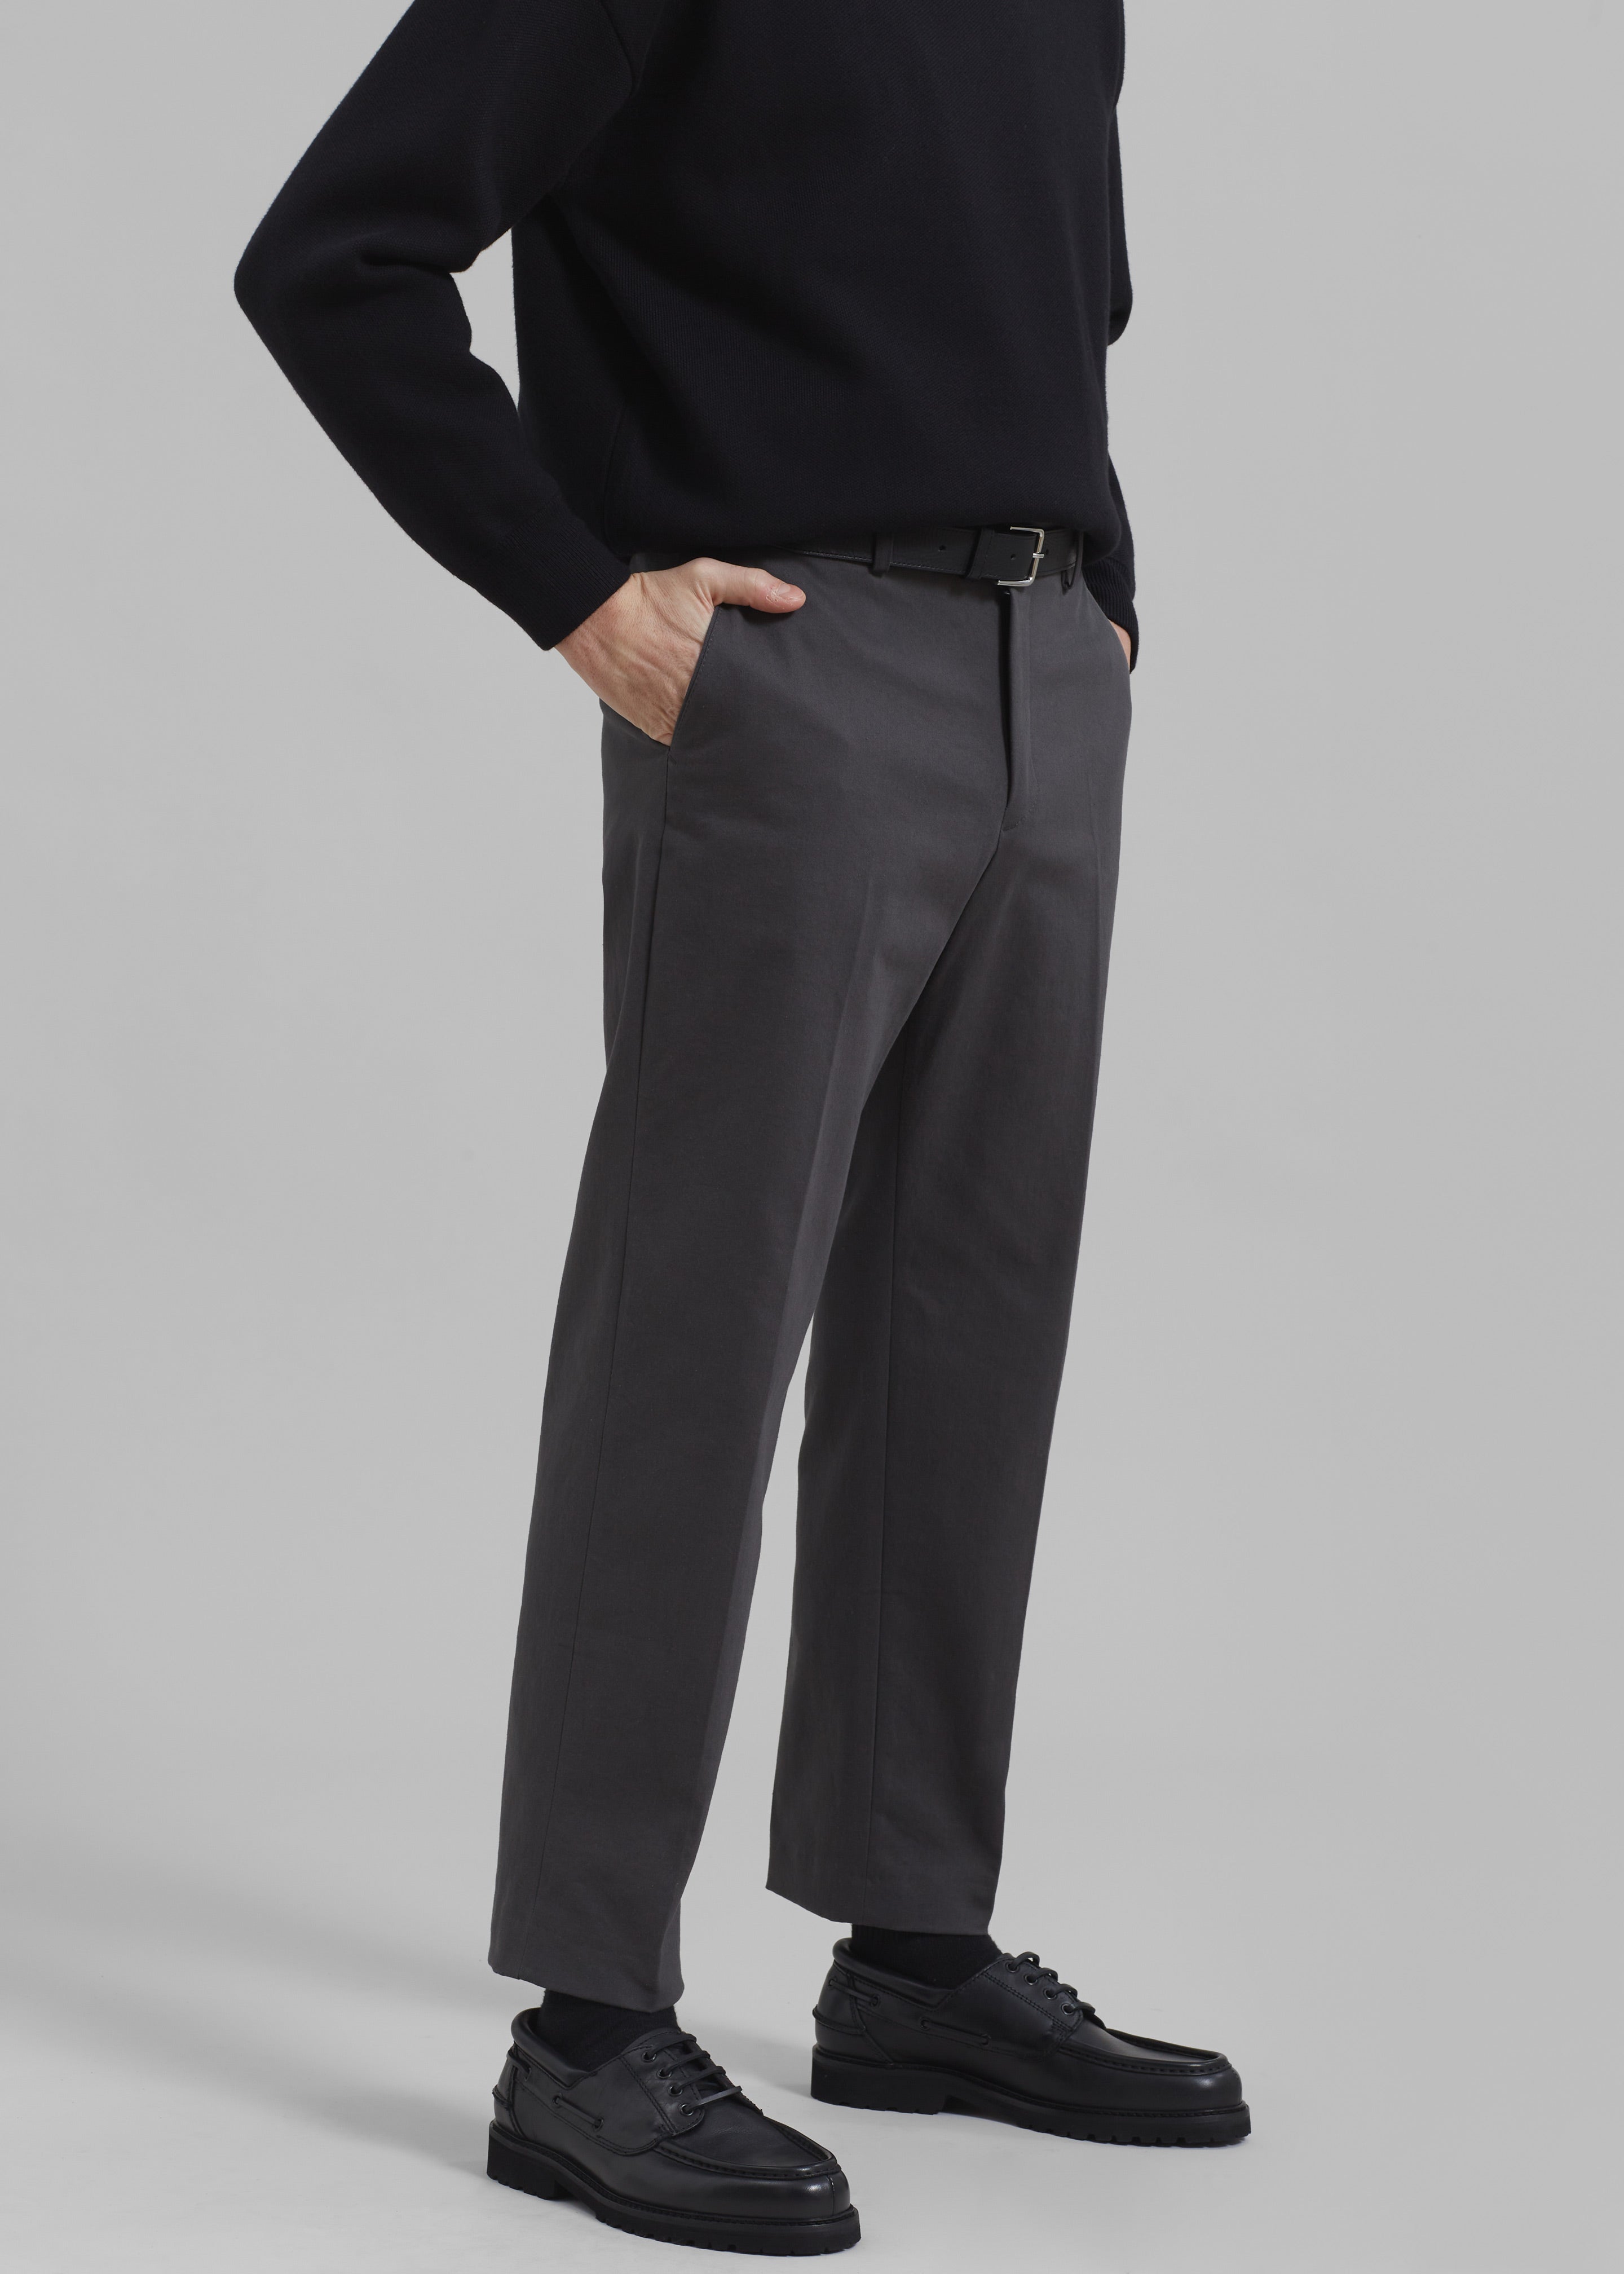 Gregory Trousers - Grey - 2